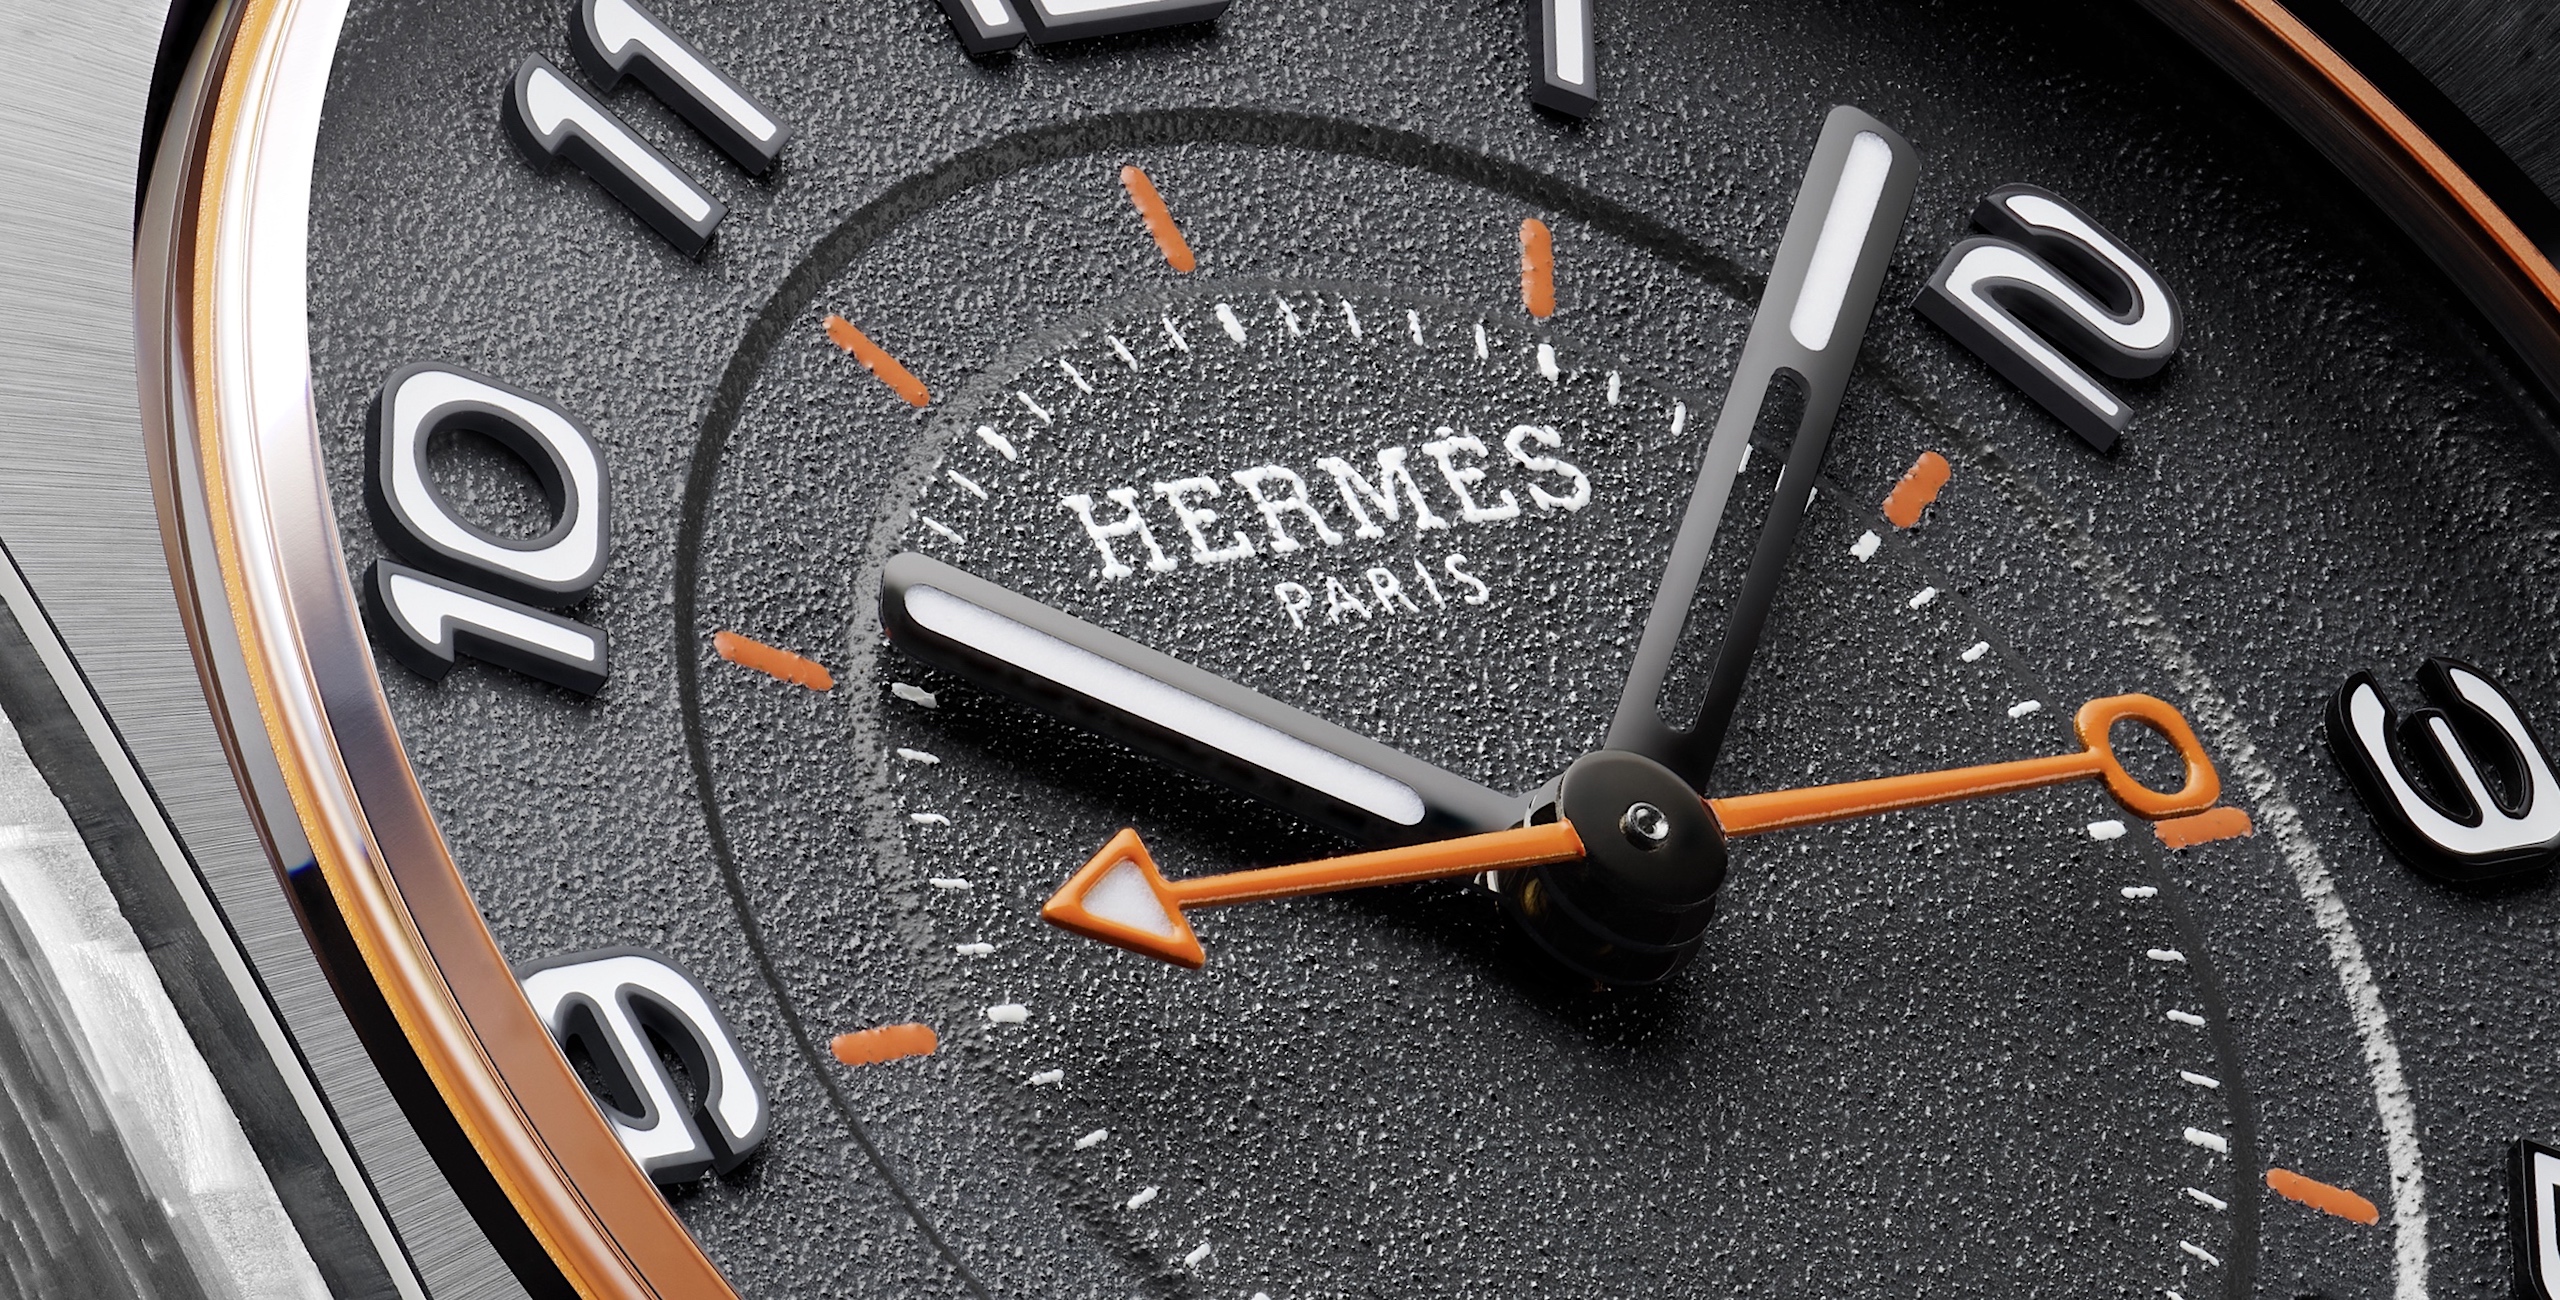 Hermès en Watches and Wonders 2023 - cover v1